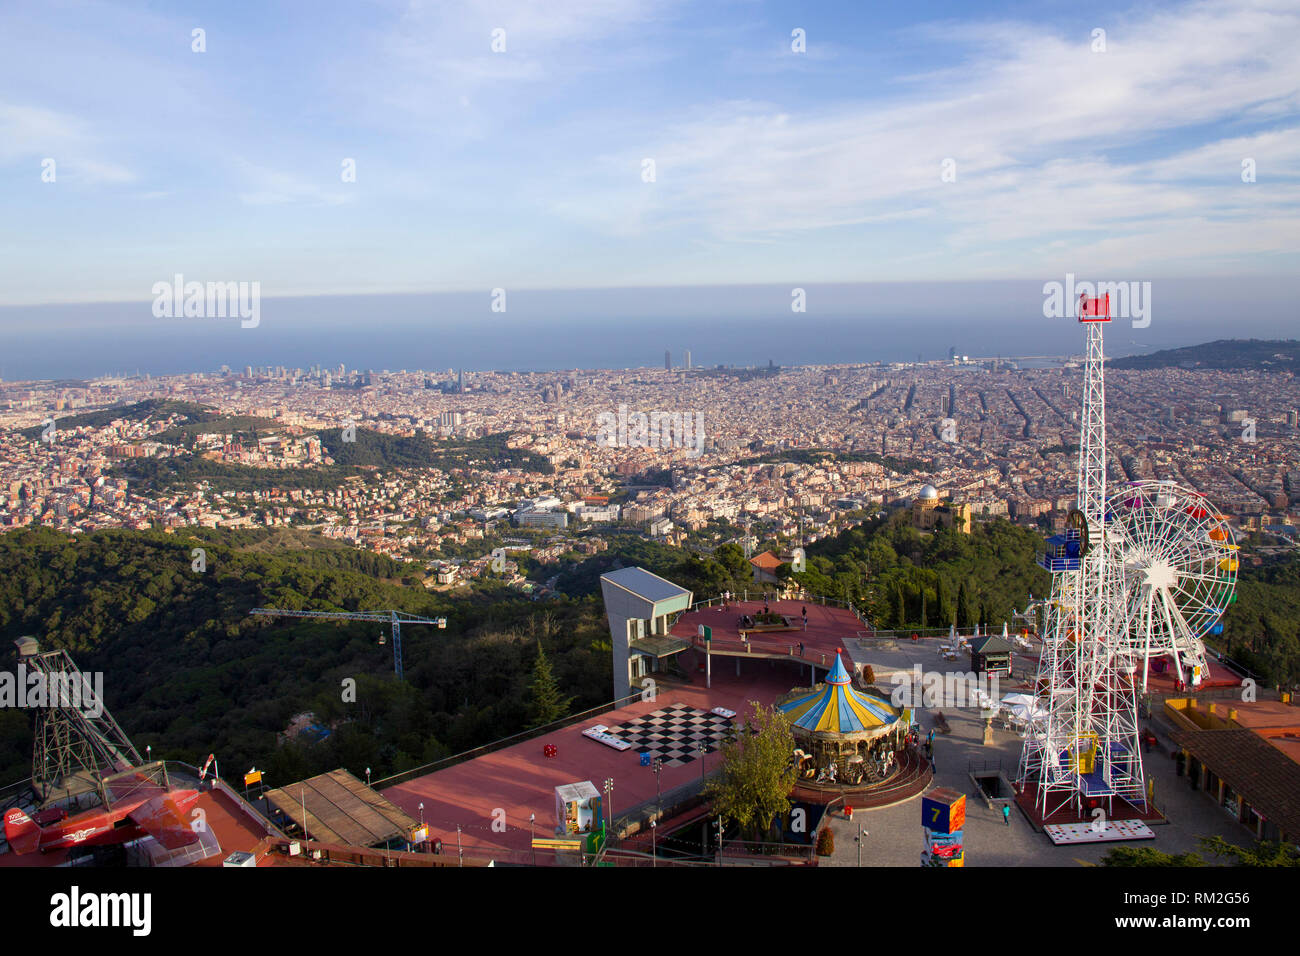 The highest observation deck with an amusement park overlooking the city and the sea. Stock Photo